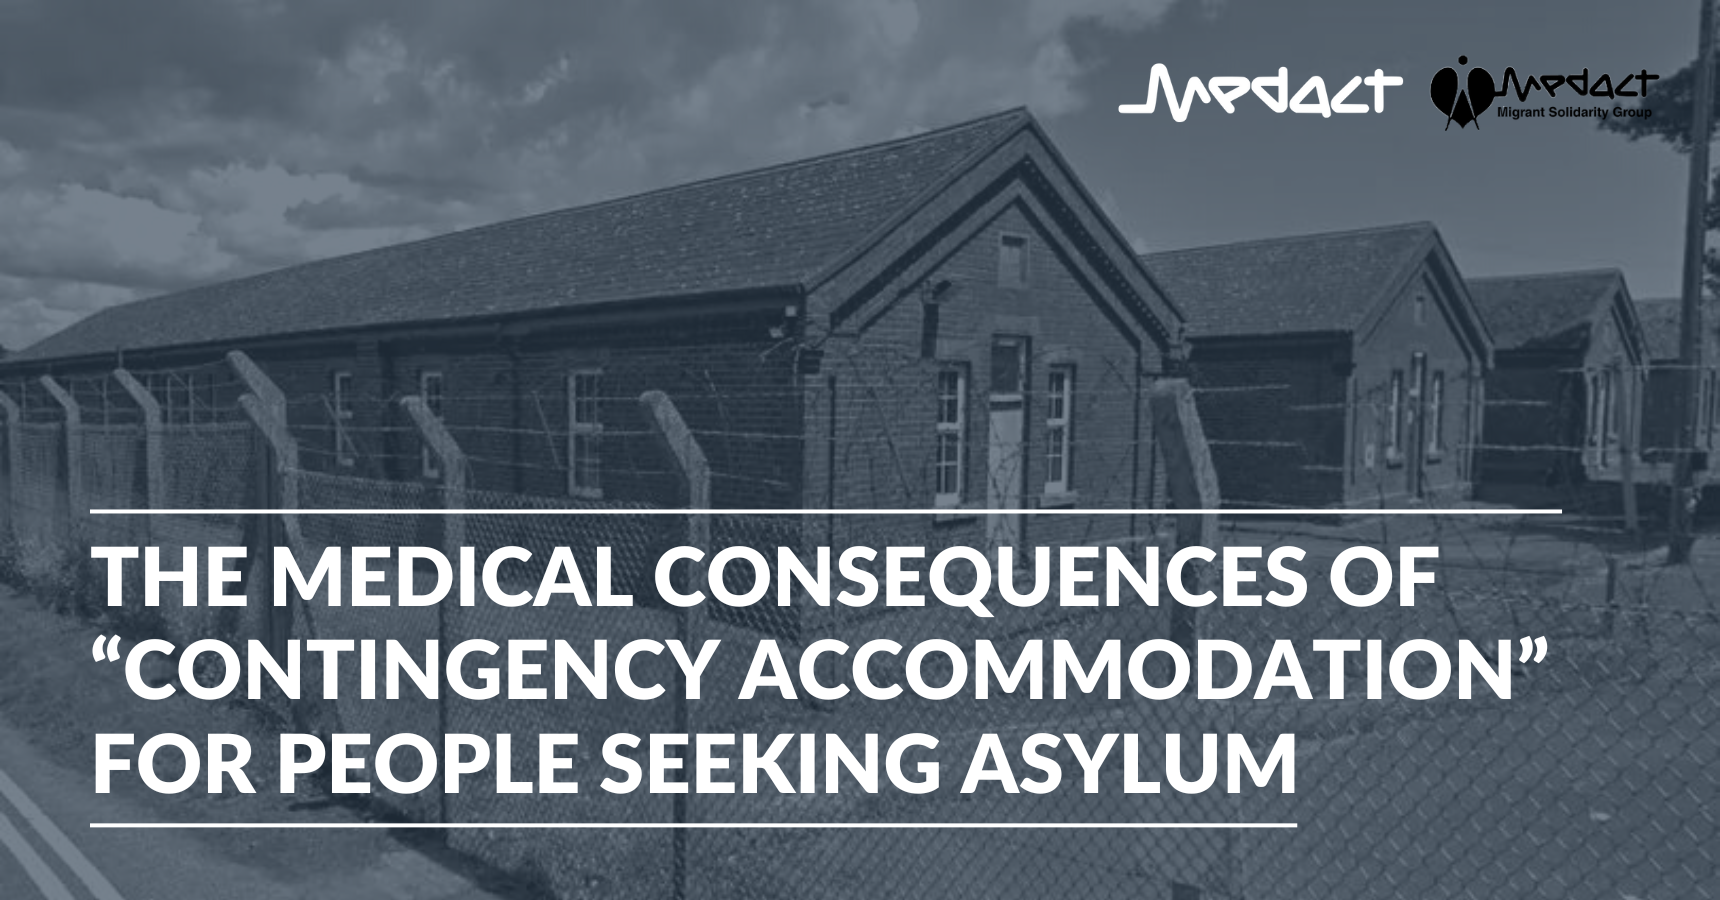 Report Launch: The Medical Consequences of Contingency Accommodation for People Seeking Asylum